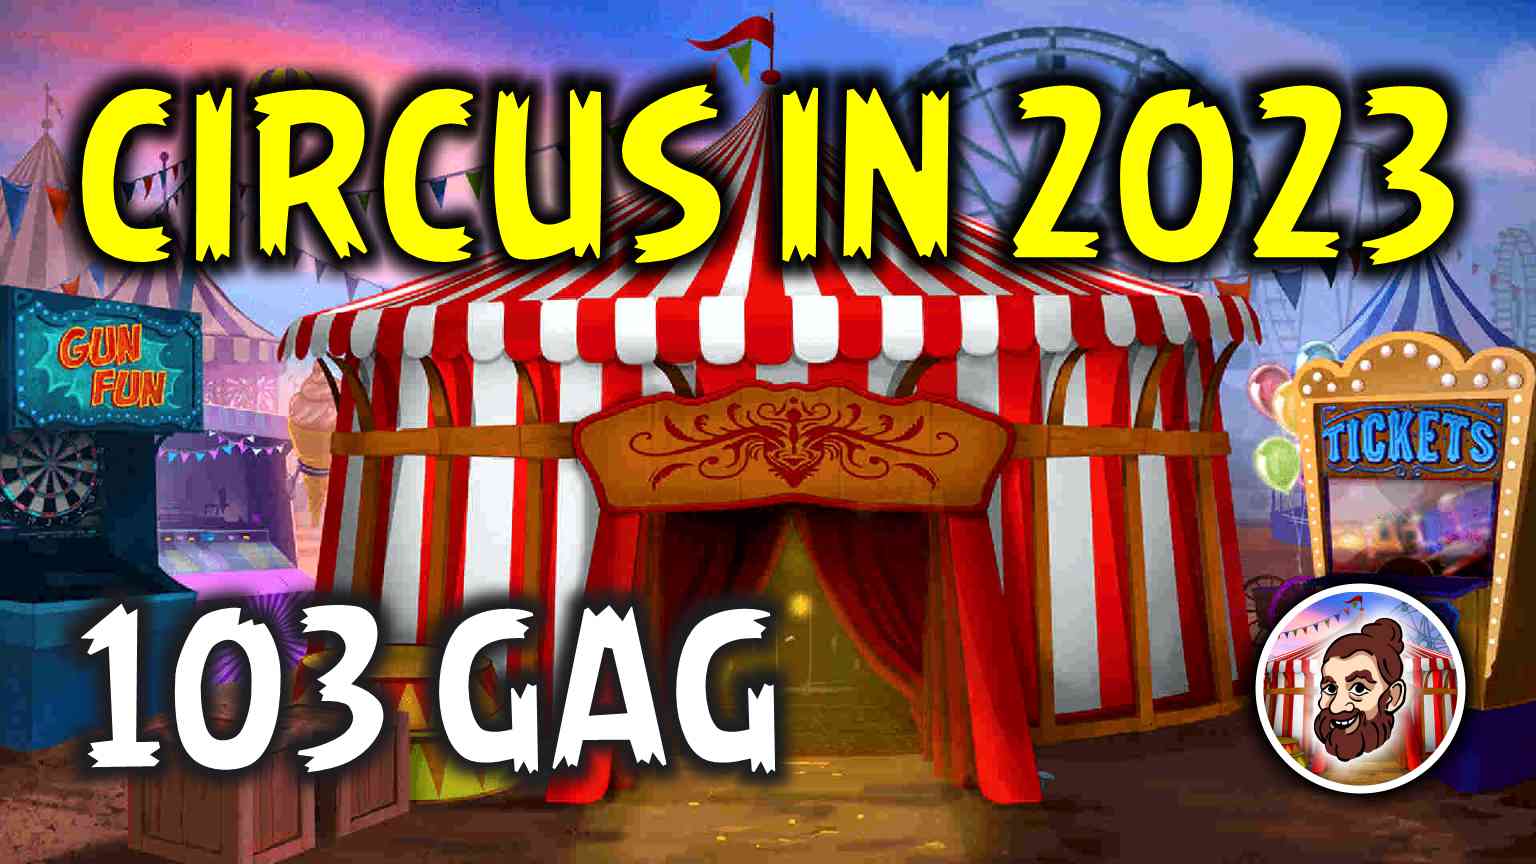 At the circus in 2023